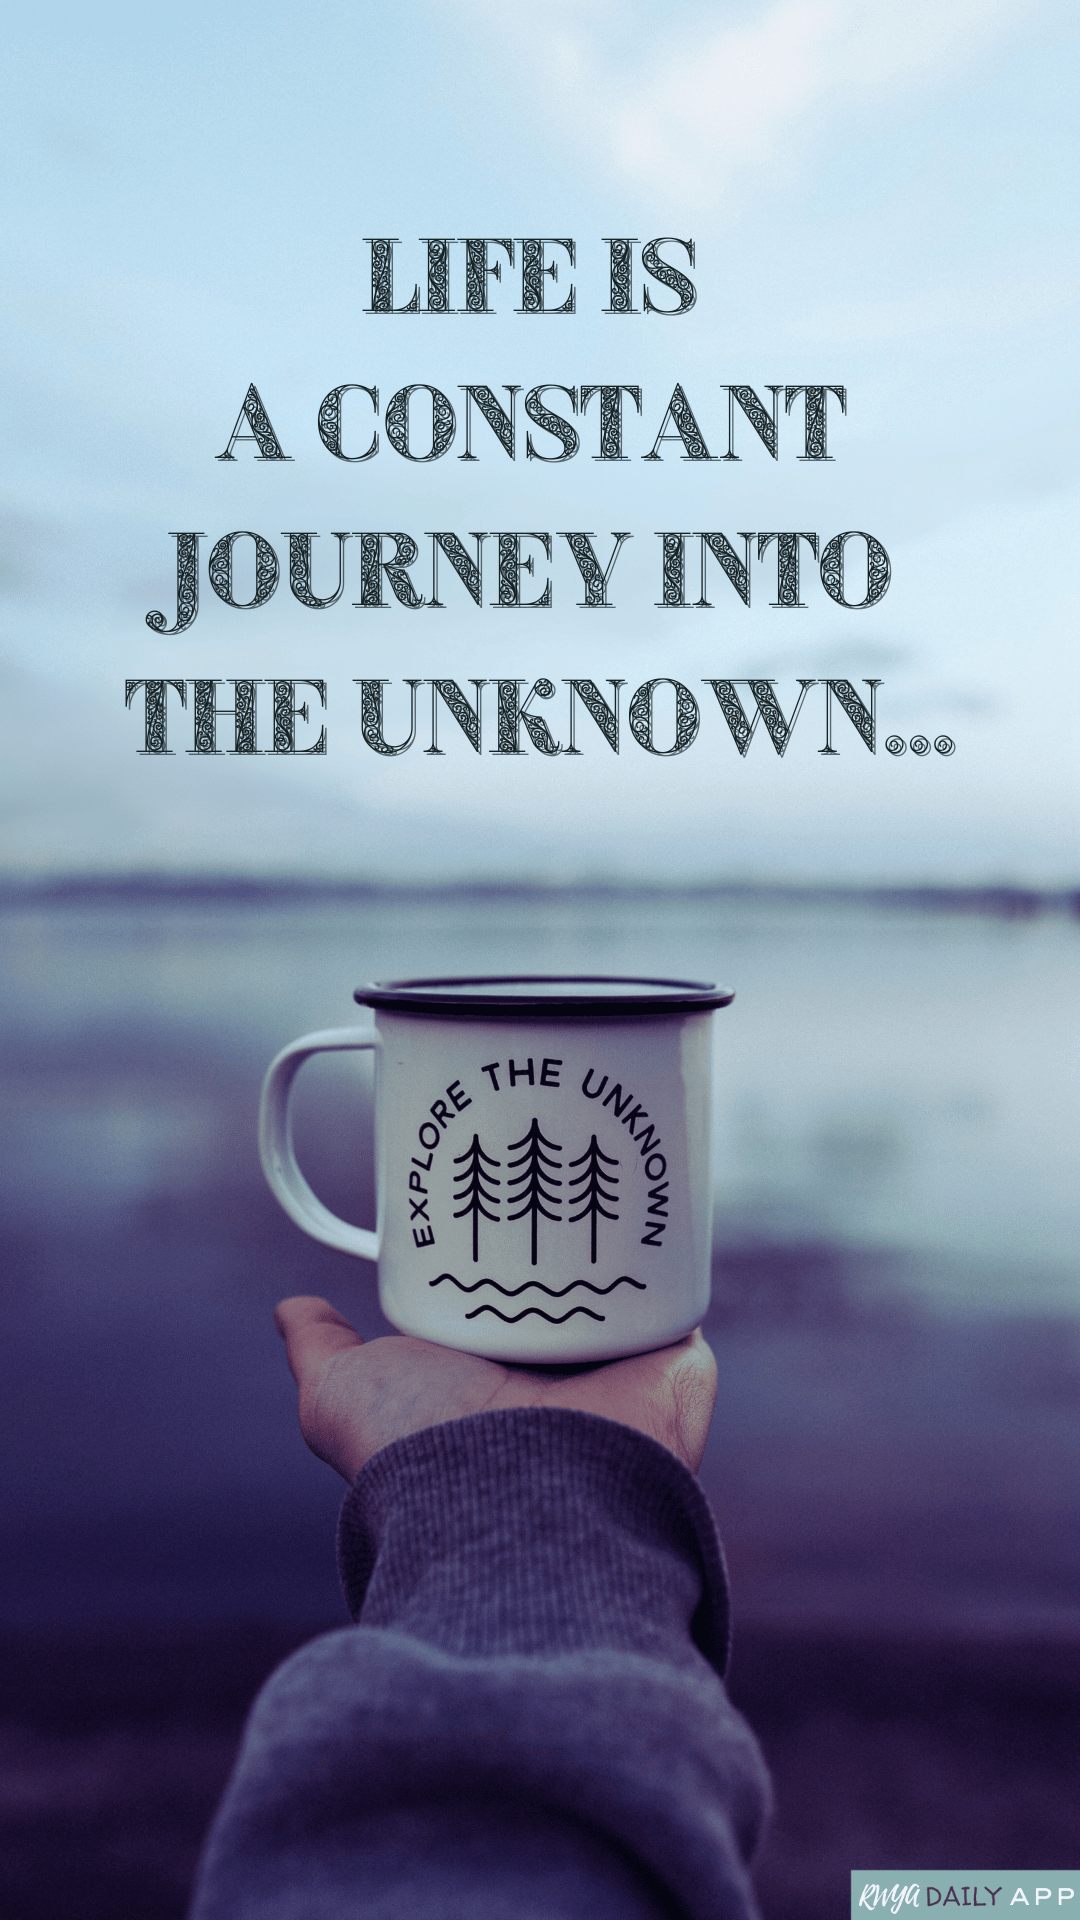 Life is a constant journey into the unknown...